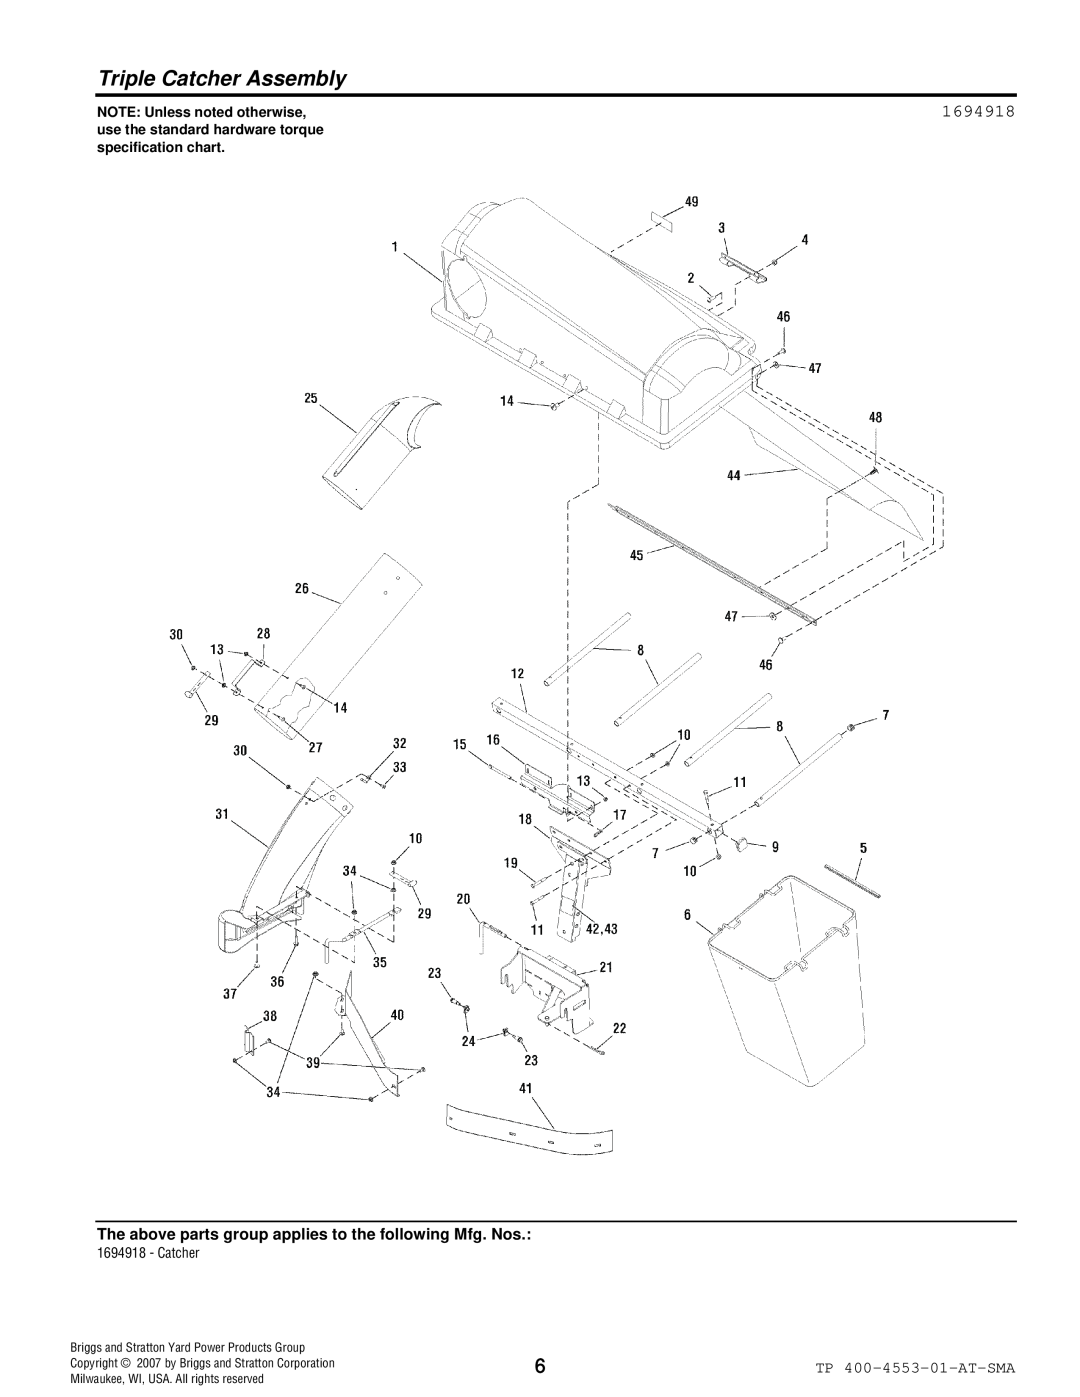 Snapper 4553 Triple Catcher Assembly, 1694918, NOTE Unless noted otherwise, Briggs and Stratton Yard Power Products Group 